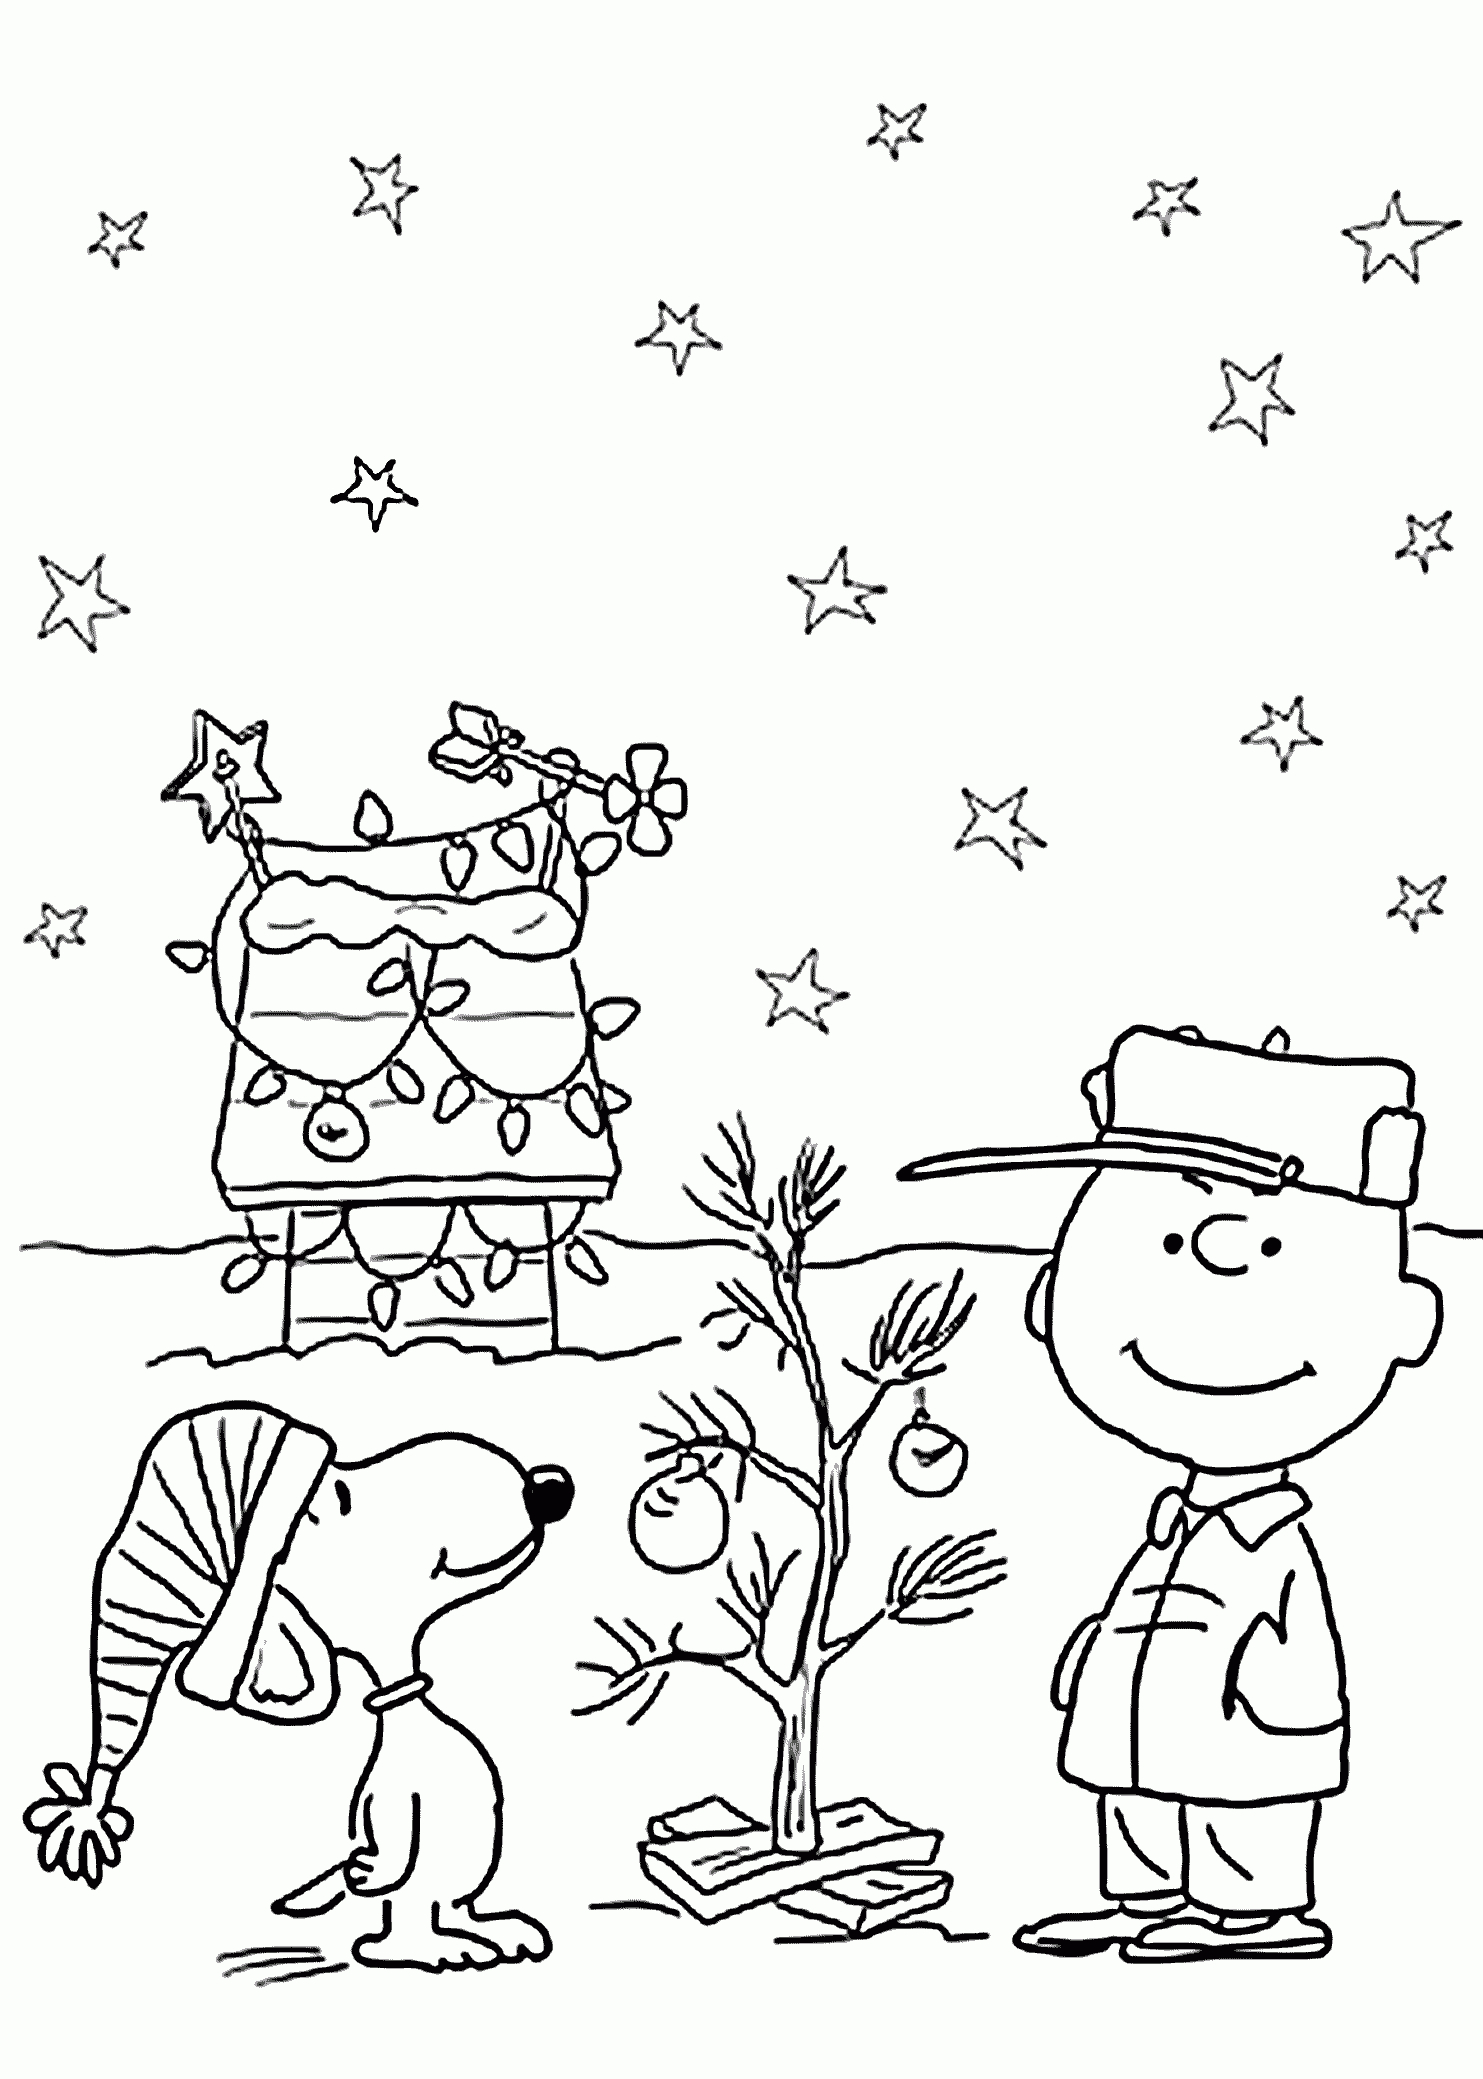 Charlie Brown And Christmas Coloring Pages For Kids, Printable Free - Free Printable Christmas Coloring Pages For Kids